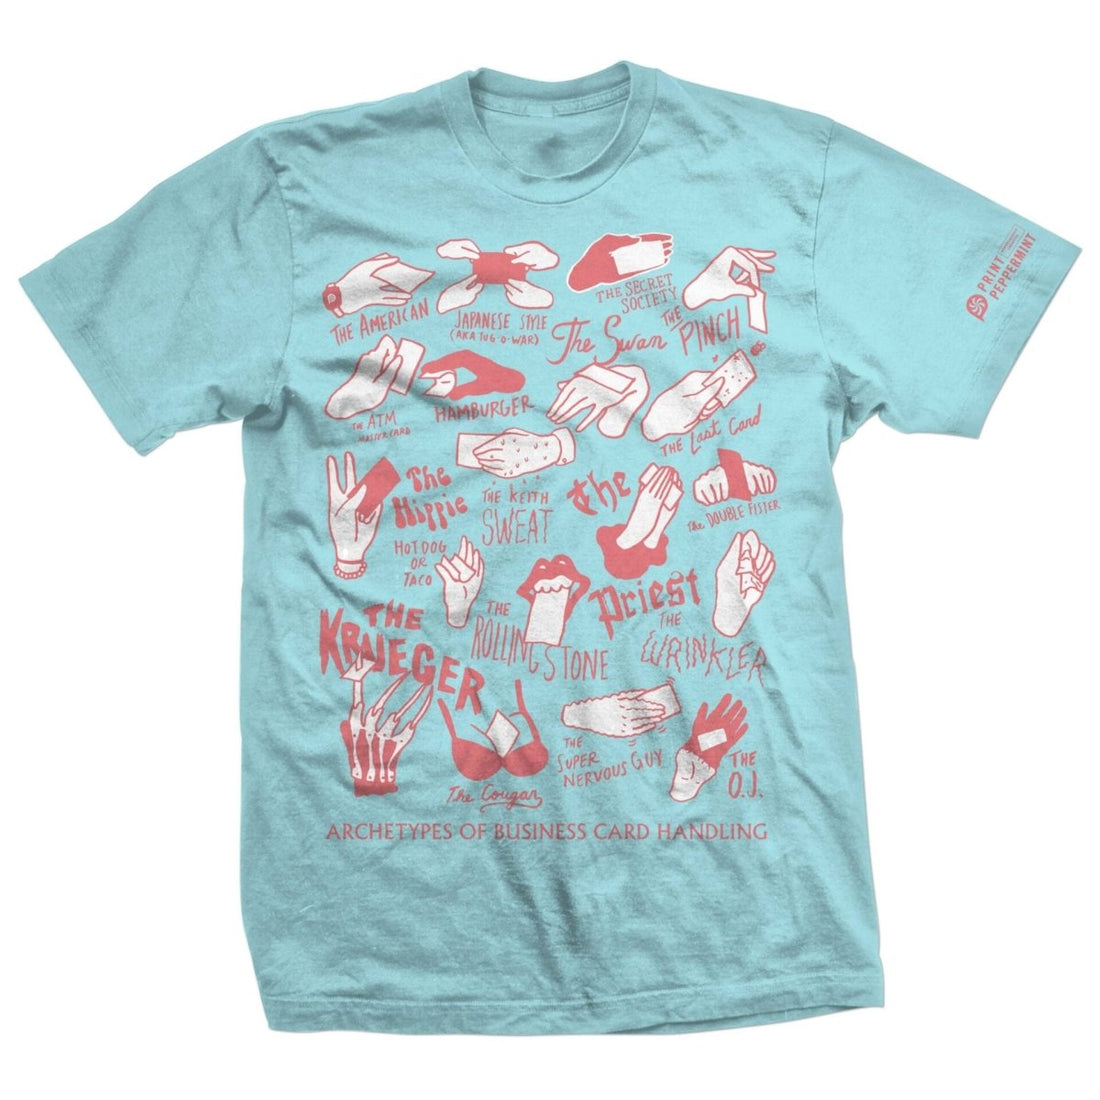 Peppermint T-shirts are coming... get excited! - Print Peppermint